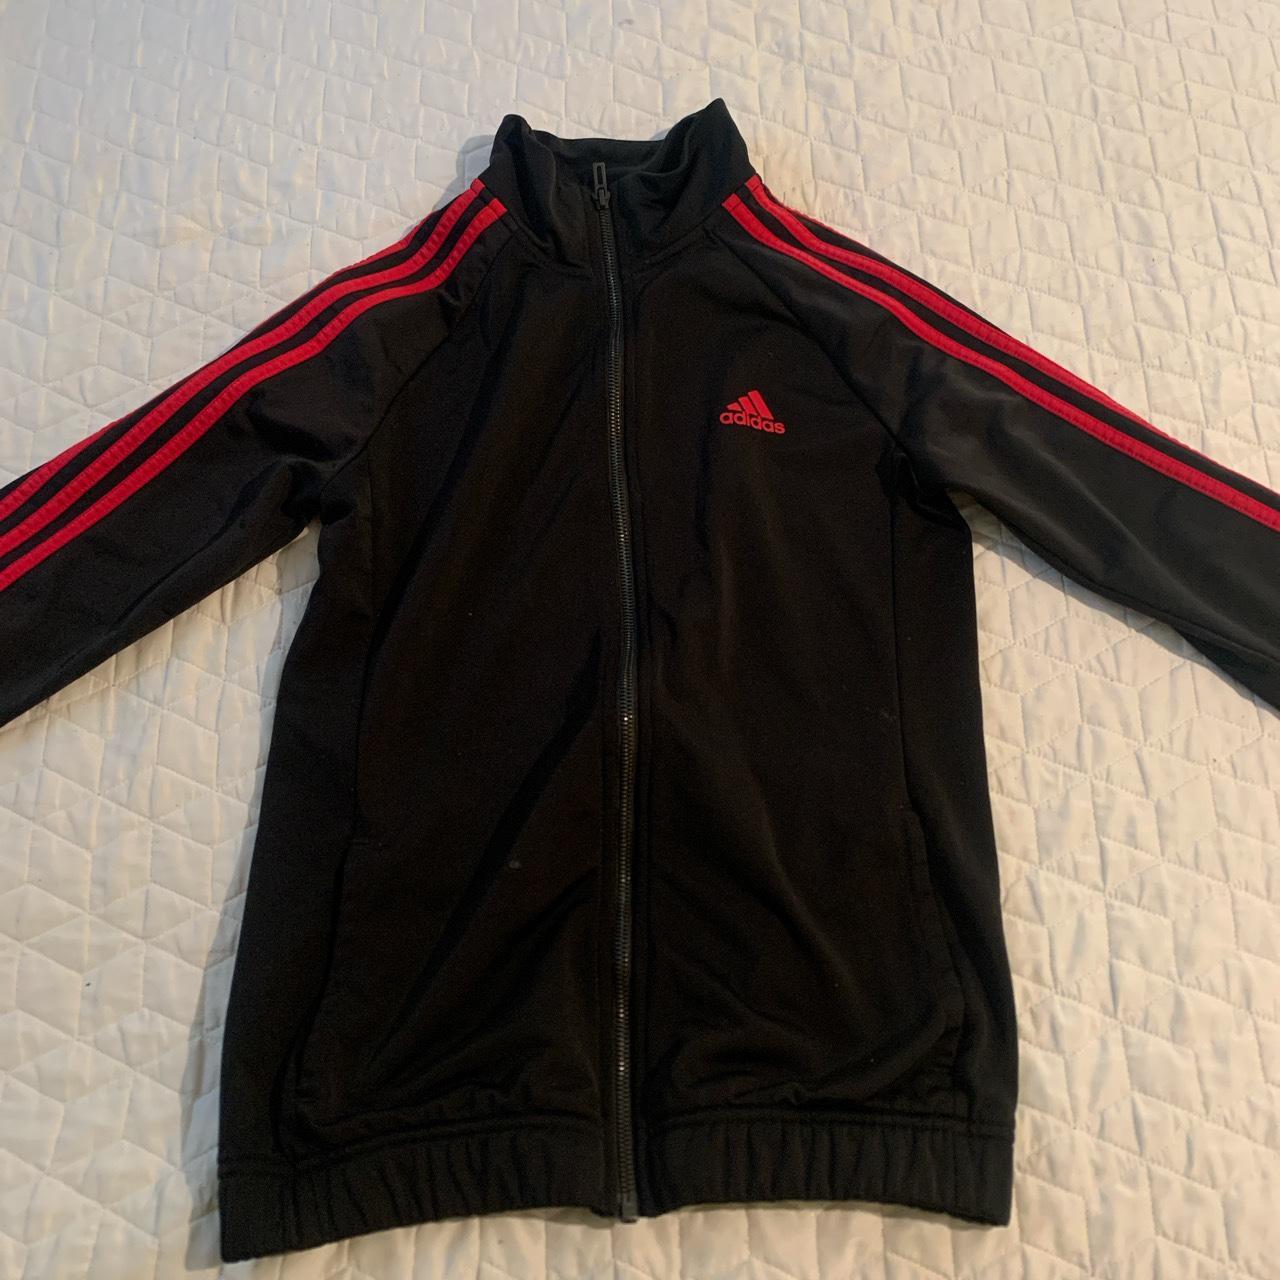 Adidas athletic jacket/zip up - open to offers -... - Depop